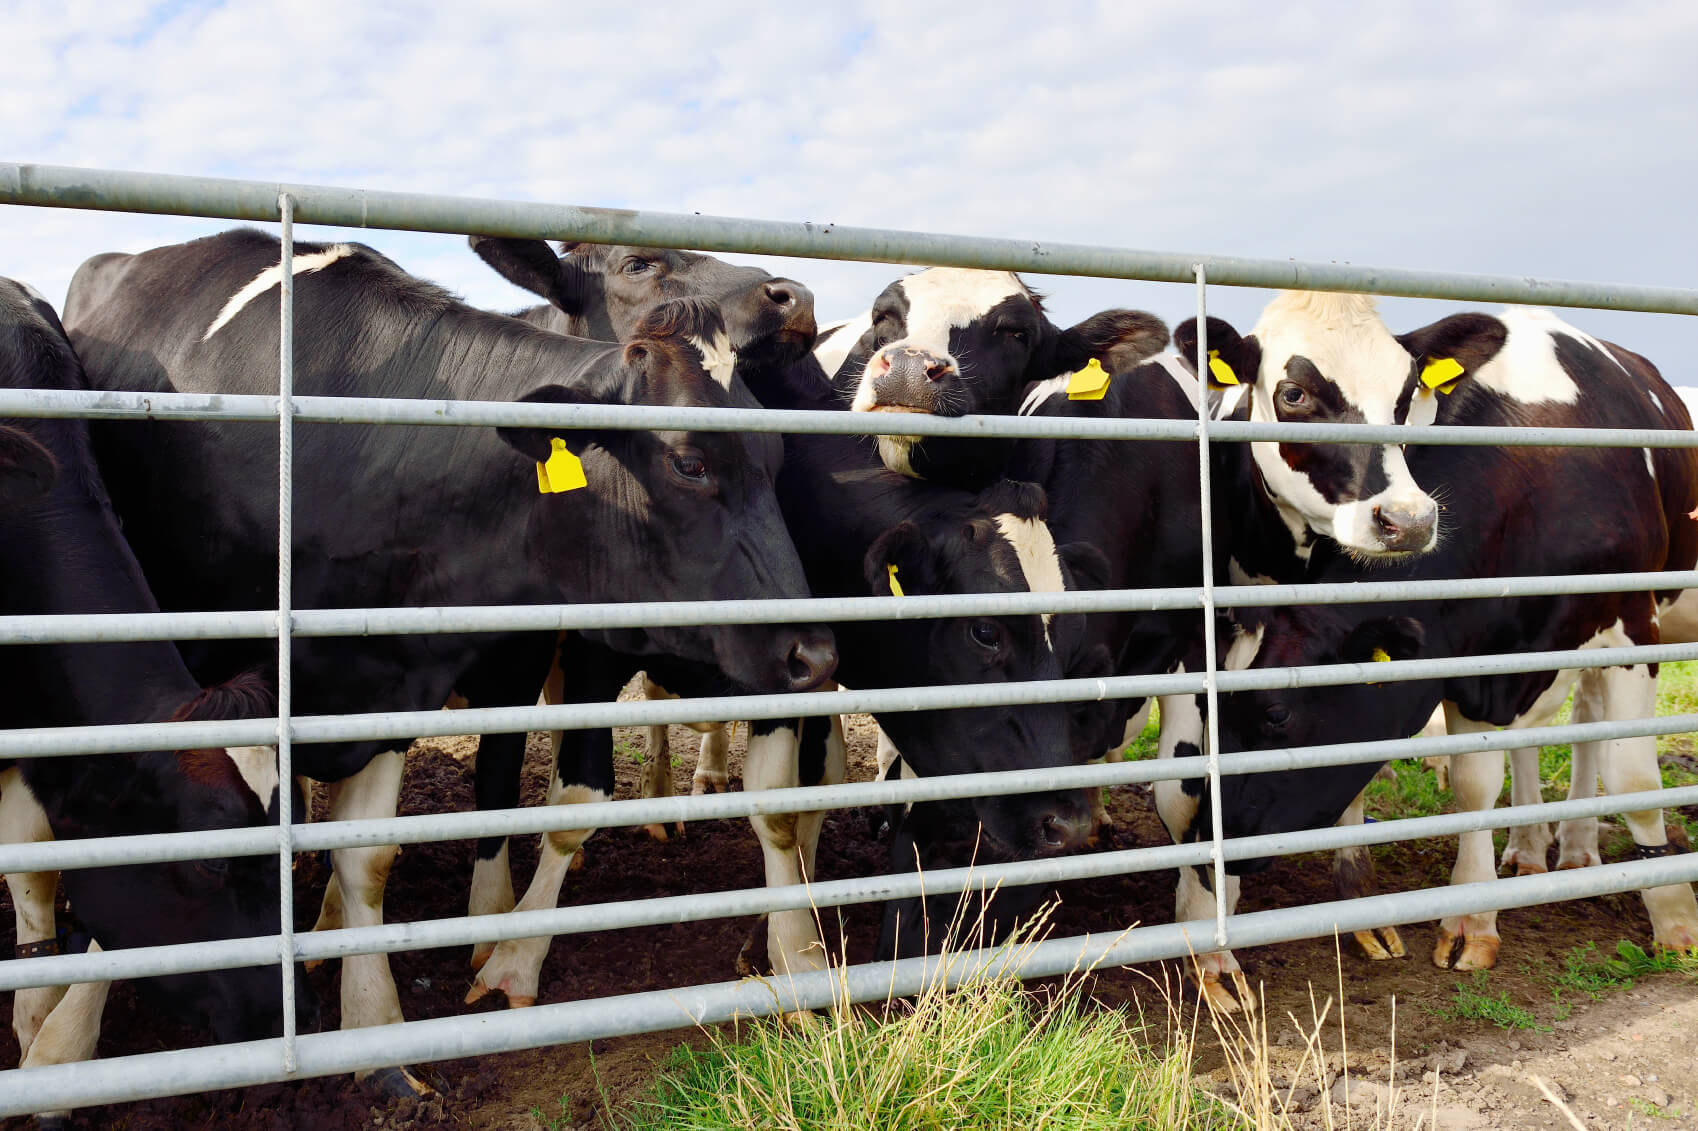 Cattle behind panel rails